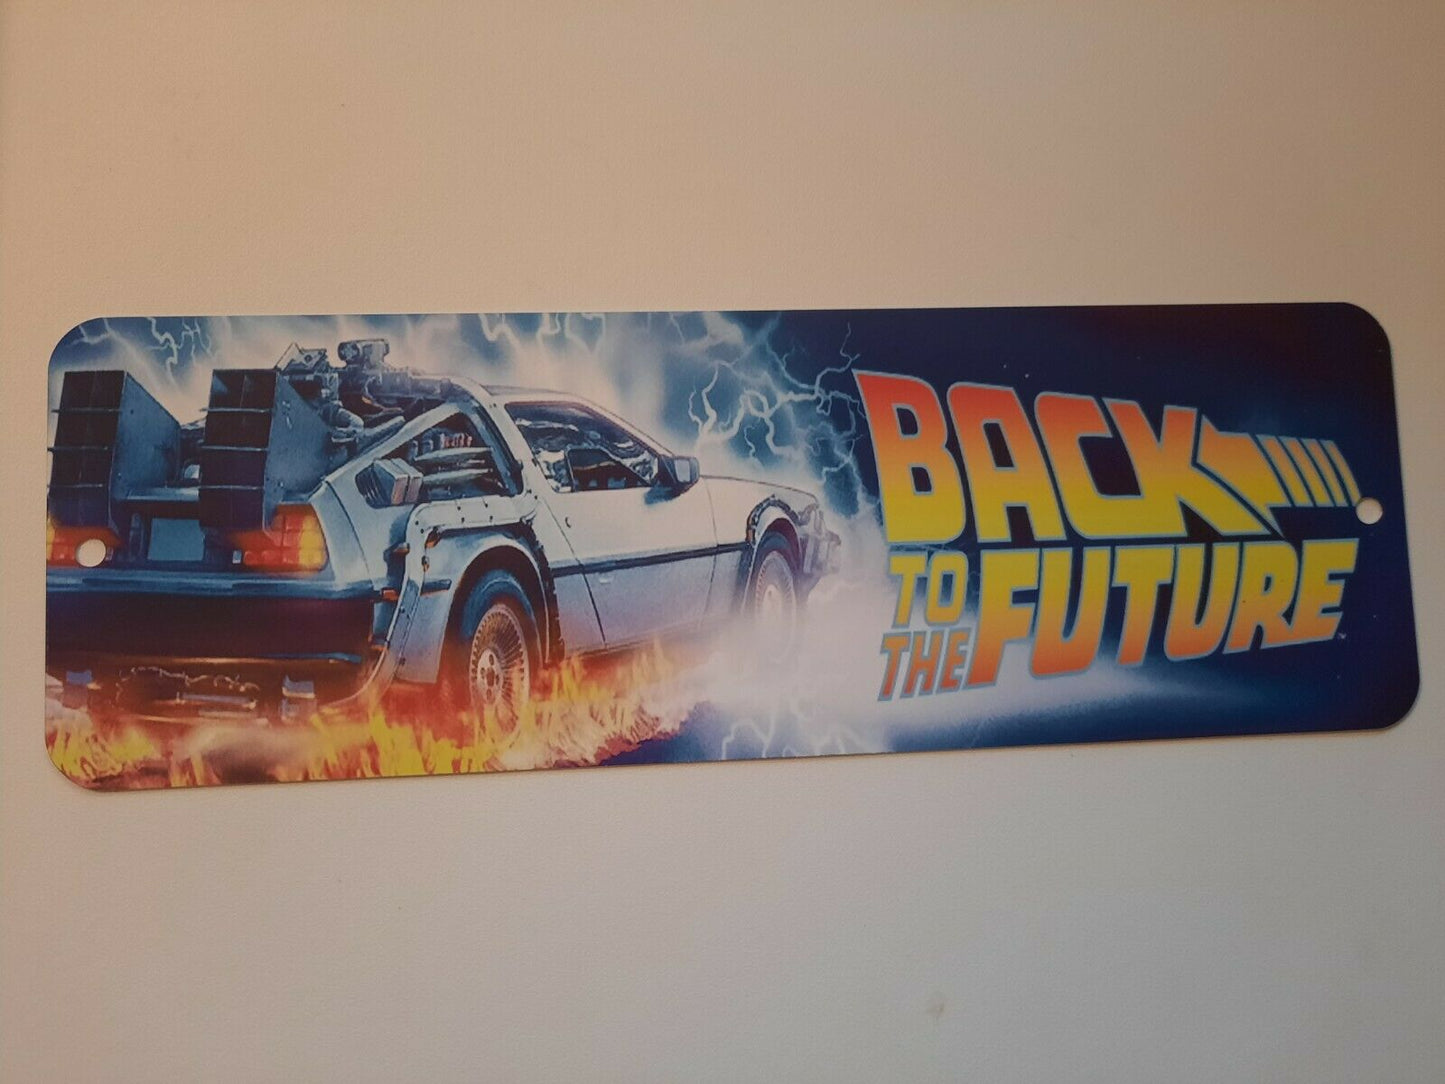 Back to the Future Banner Marquee 4x12 Metal Wall Sign Retro 80s Comedy Sci-Fi Movie Poster